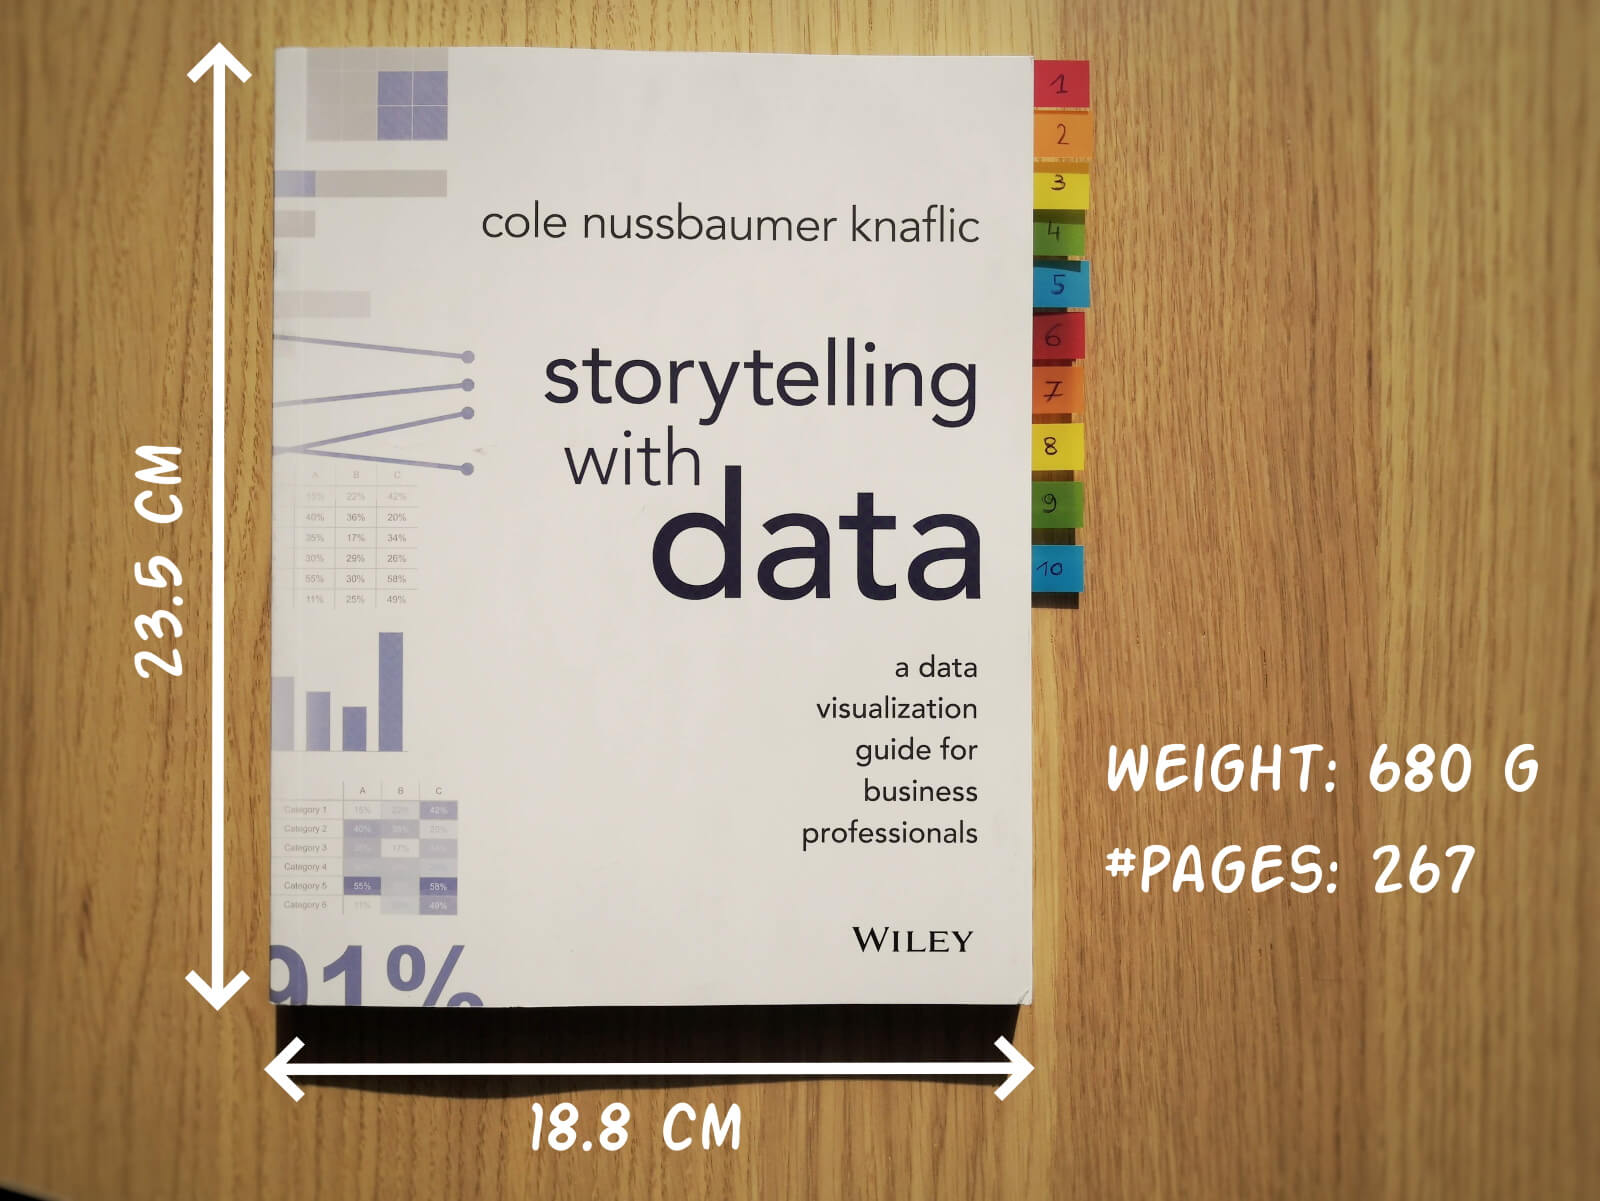 storytelling with data